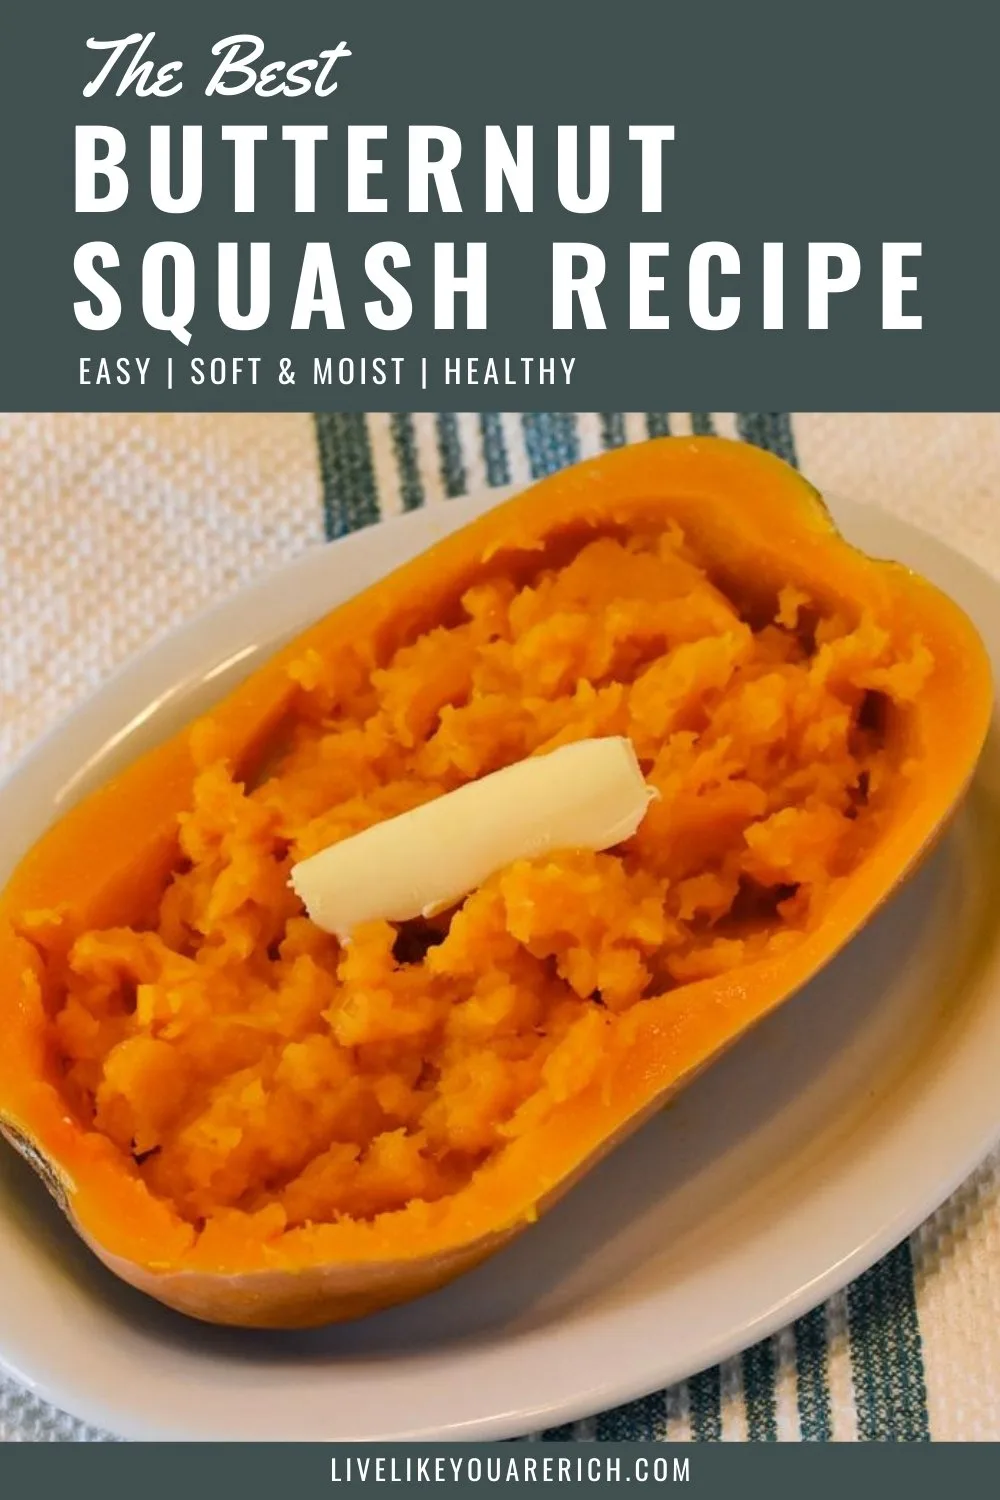 How to Cook Butternut Squash—the Easy Way. The instructions are very simple and it only took a few minutes to prepare before we cooked it (over an hour). Cooking the butternut squash as we did makes it very soft and moist. It is also healthy, rich in fiber and vitamin A which is good for the eyes.